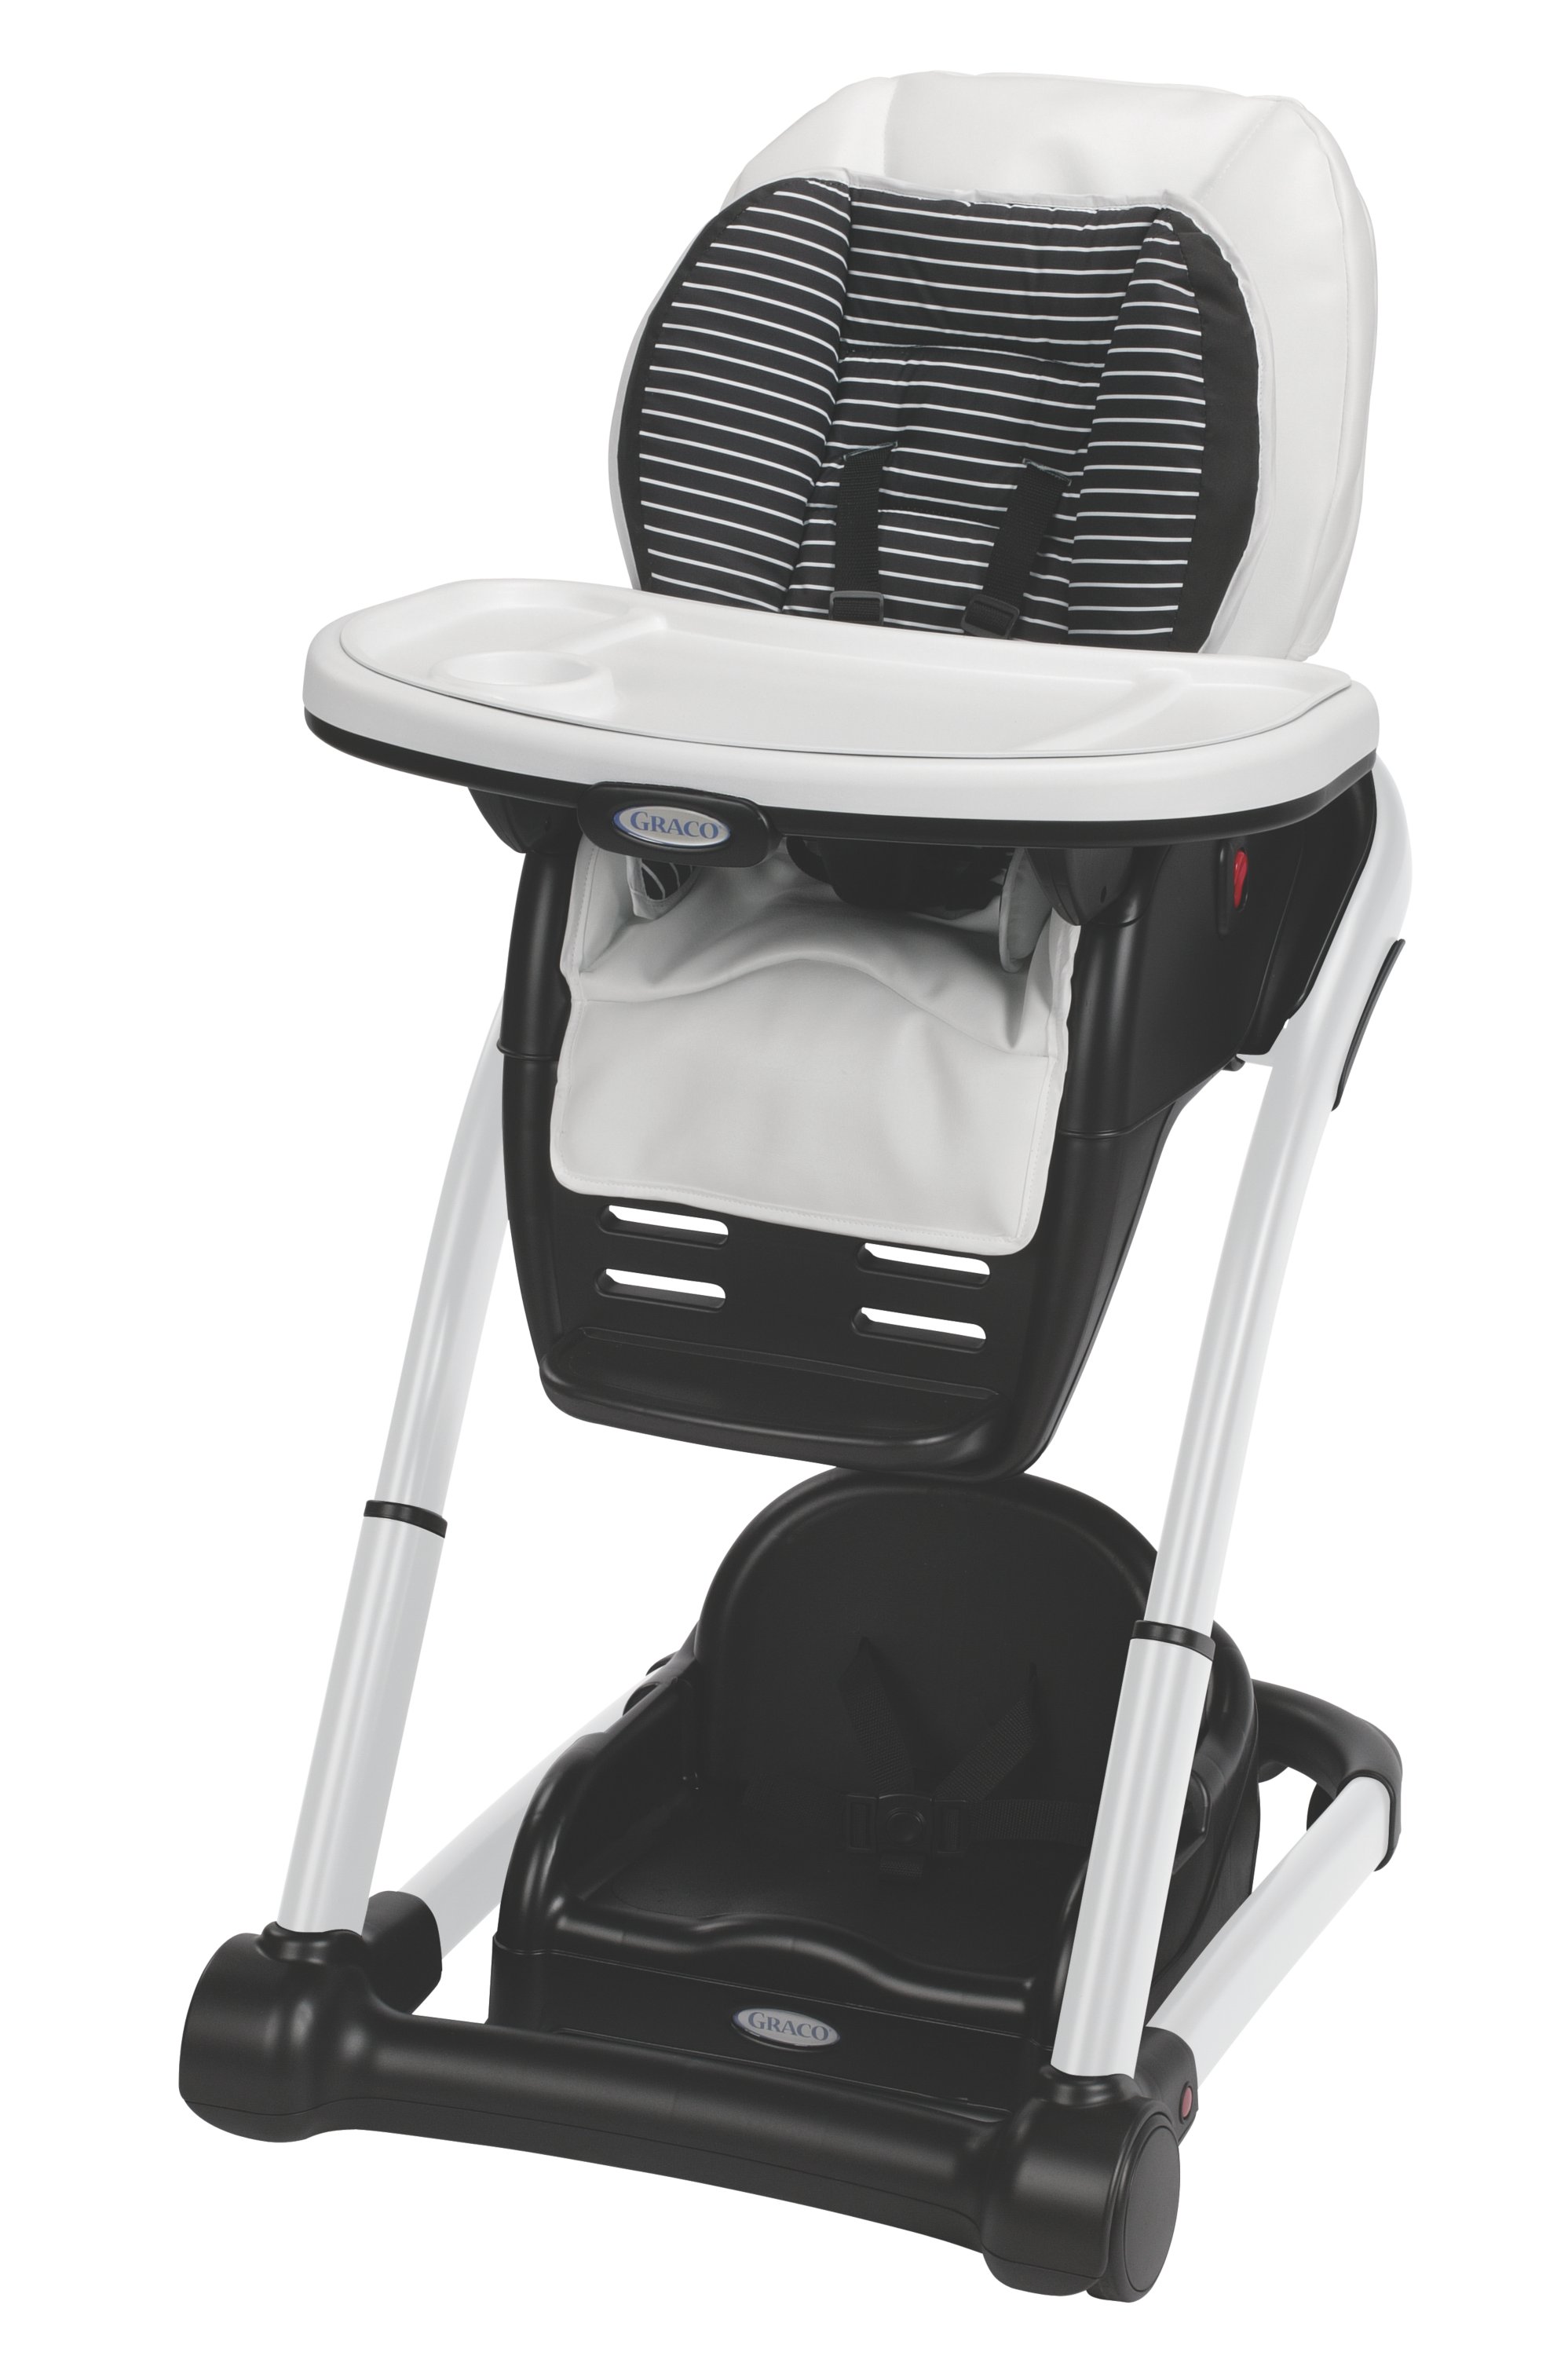 Blossom™ 6-In-1 Convertible High Chair | Graco Baby